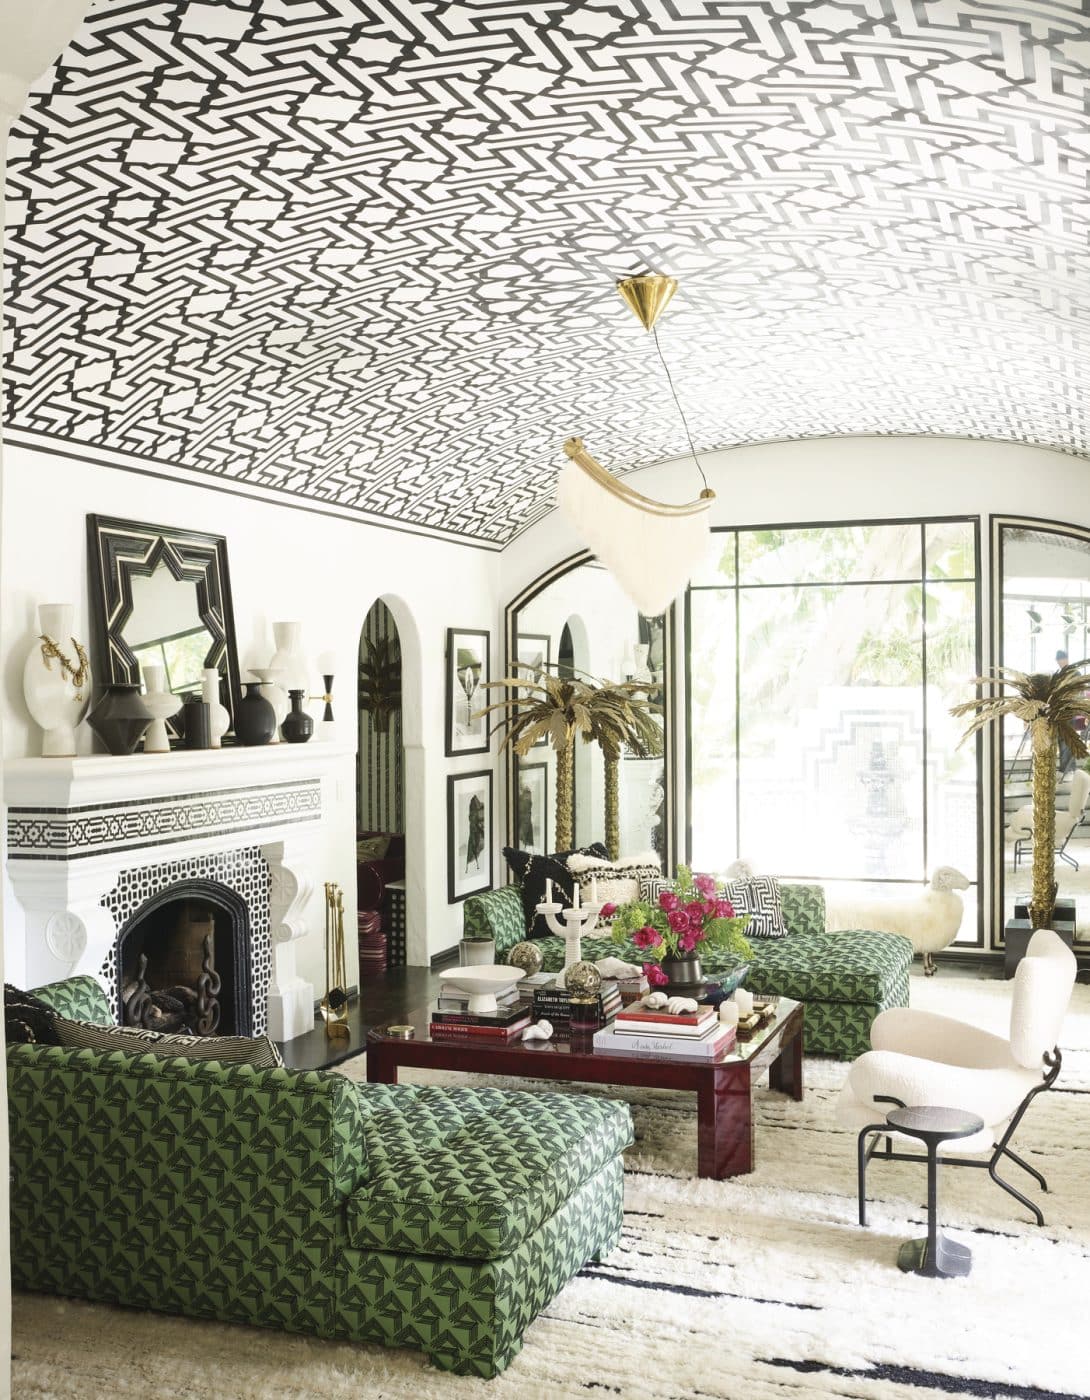 Living room of interior designer Martyn Lawrence Bullard's Moroccan-influenced West Hollywood home featuring sofas from his Martyn Lawrence Bullard Atelier collection of furniture